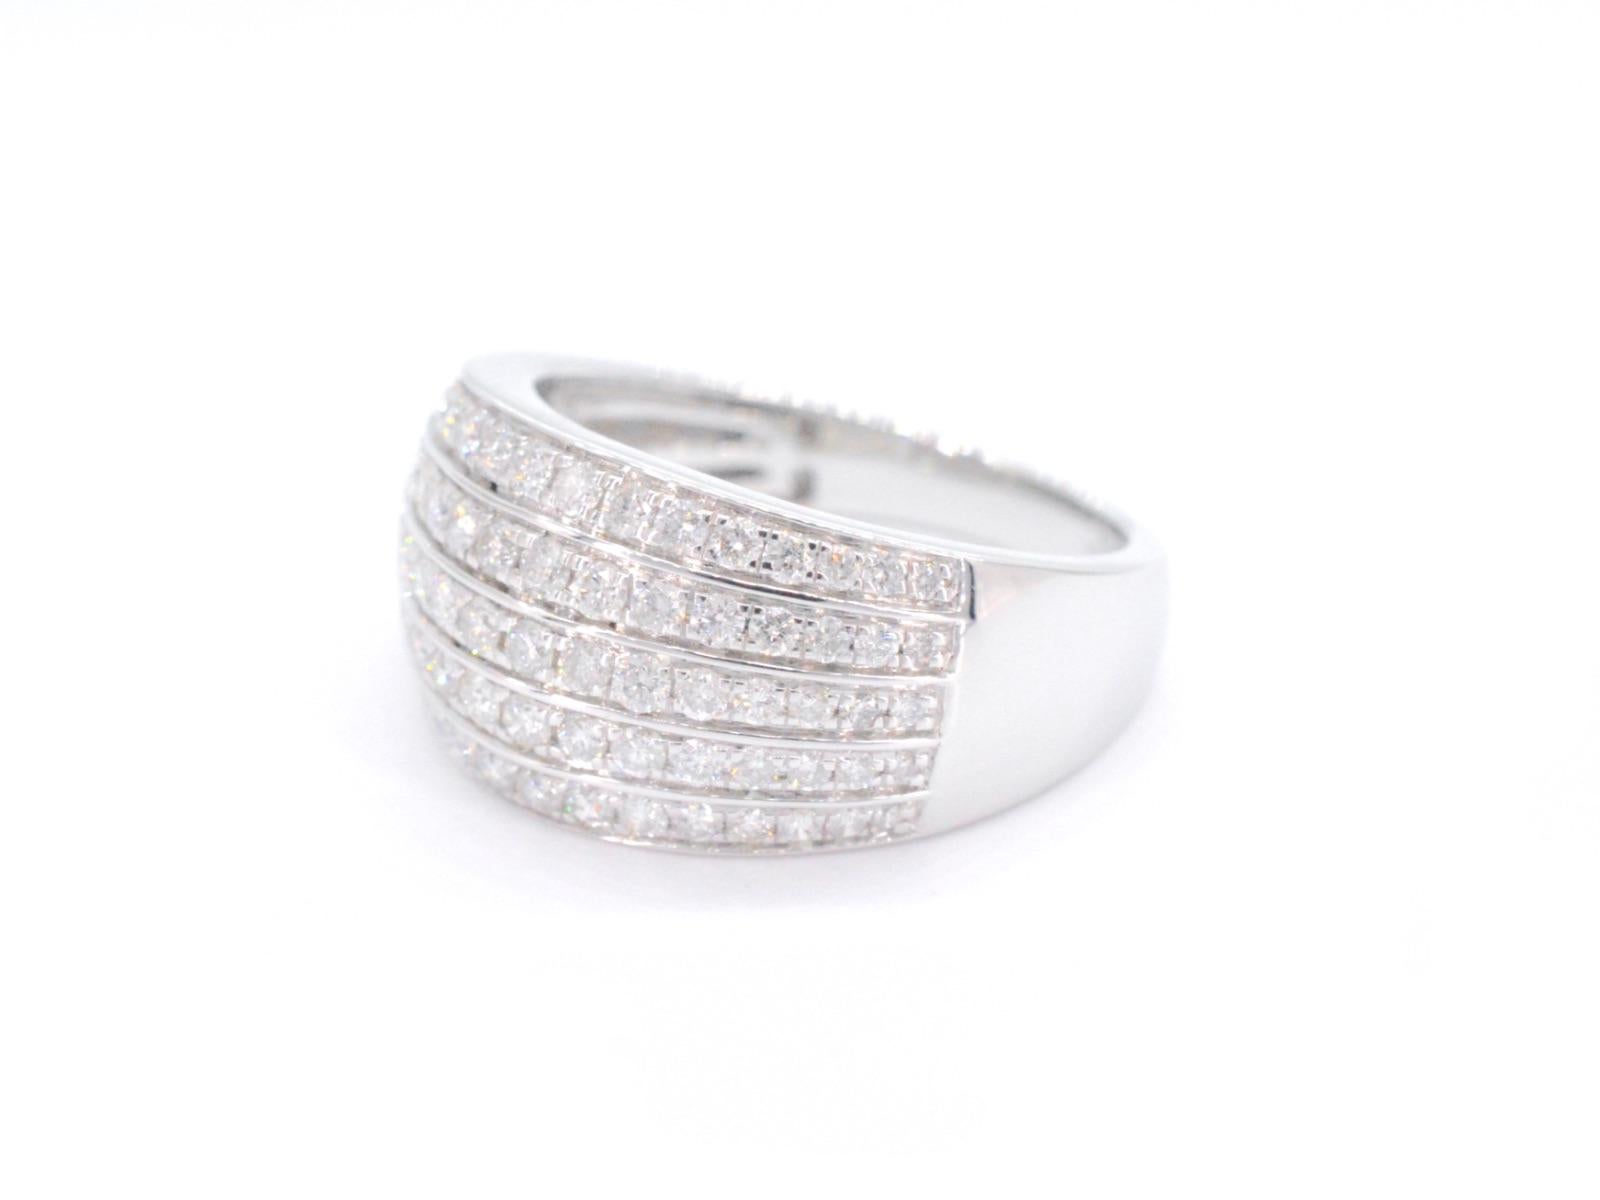 A white gold ring with diamonds weighing 1.00 carat is a stunning piece of jewelry that features a sparkling diamond centerpiece set in a band of lustrous white gold. The 1.00 carat weight of the diamonds makes this ring a truly breathtaking and